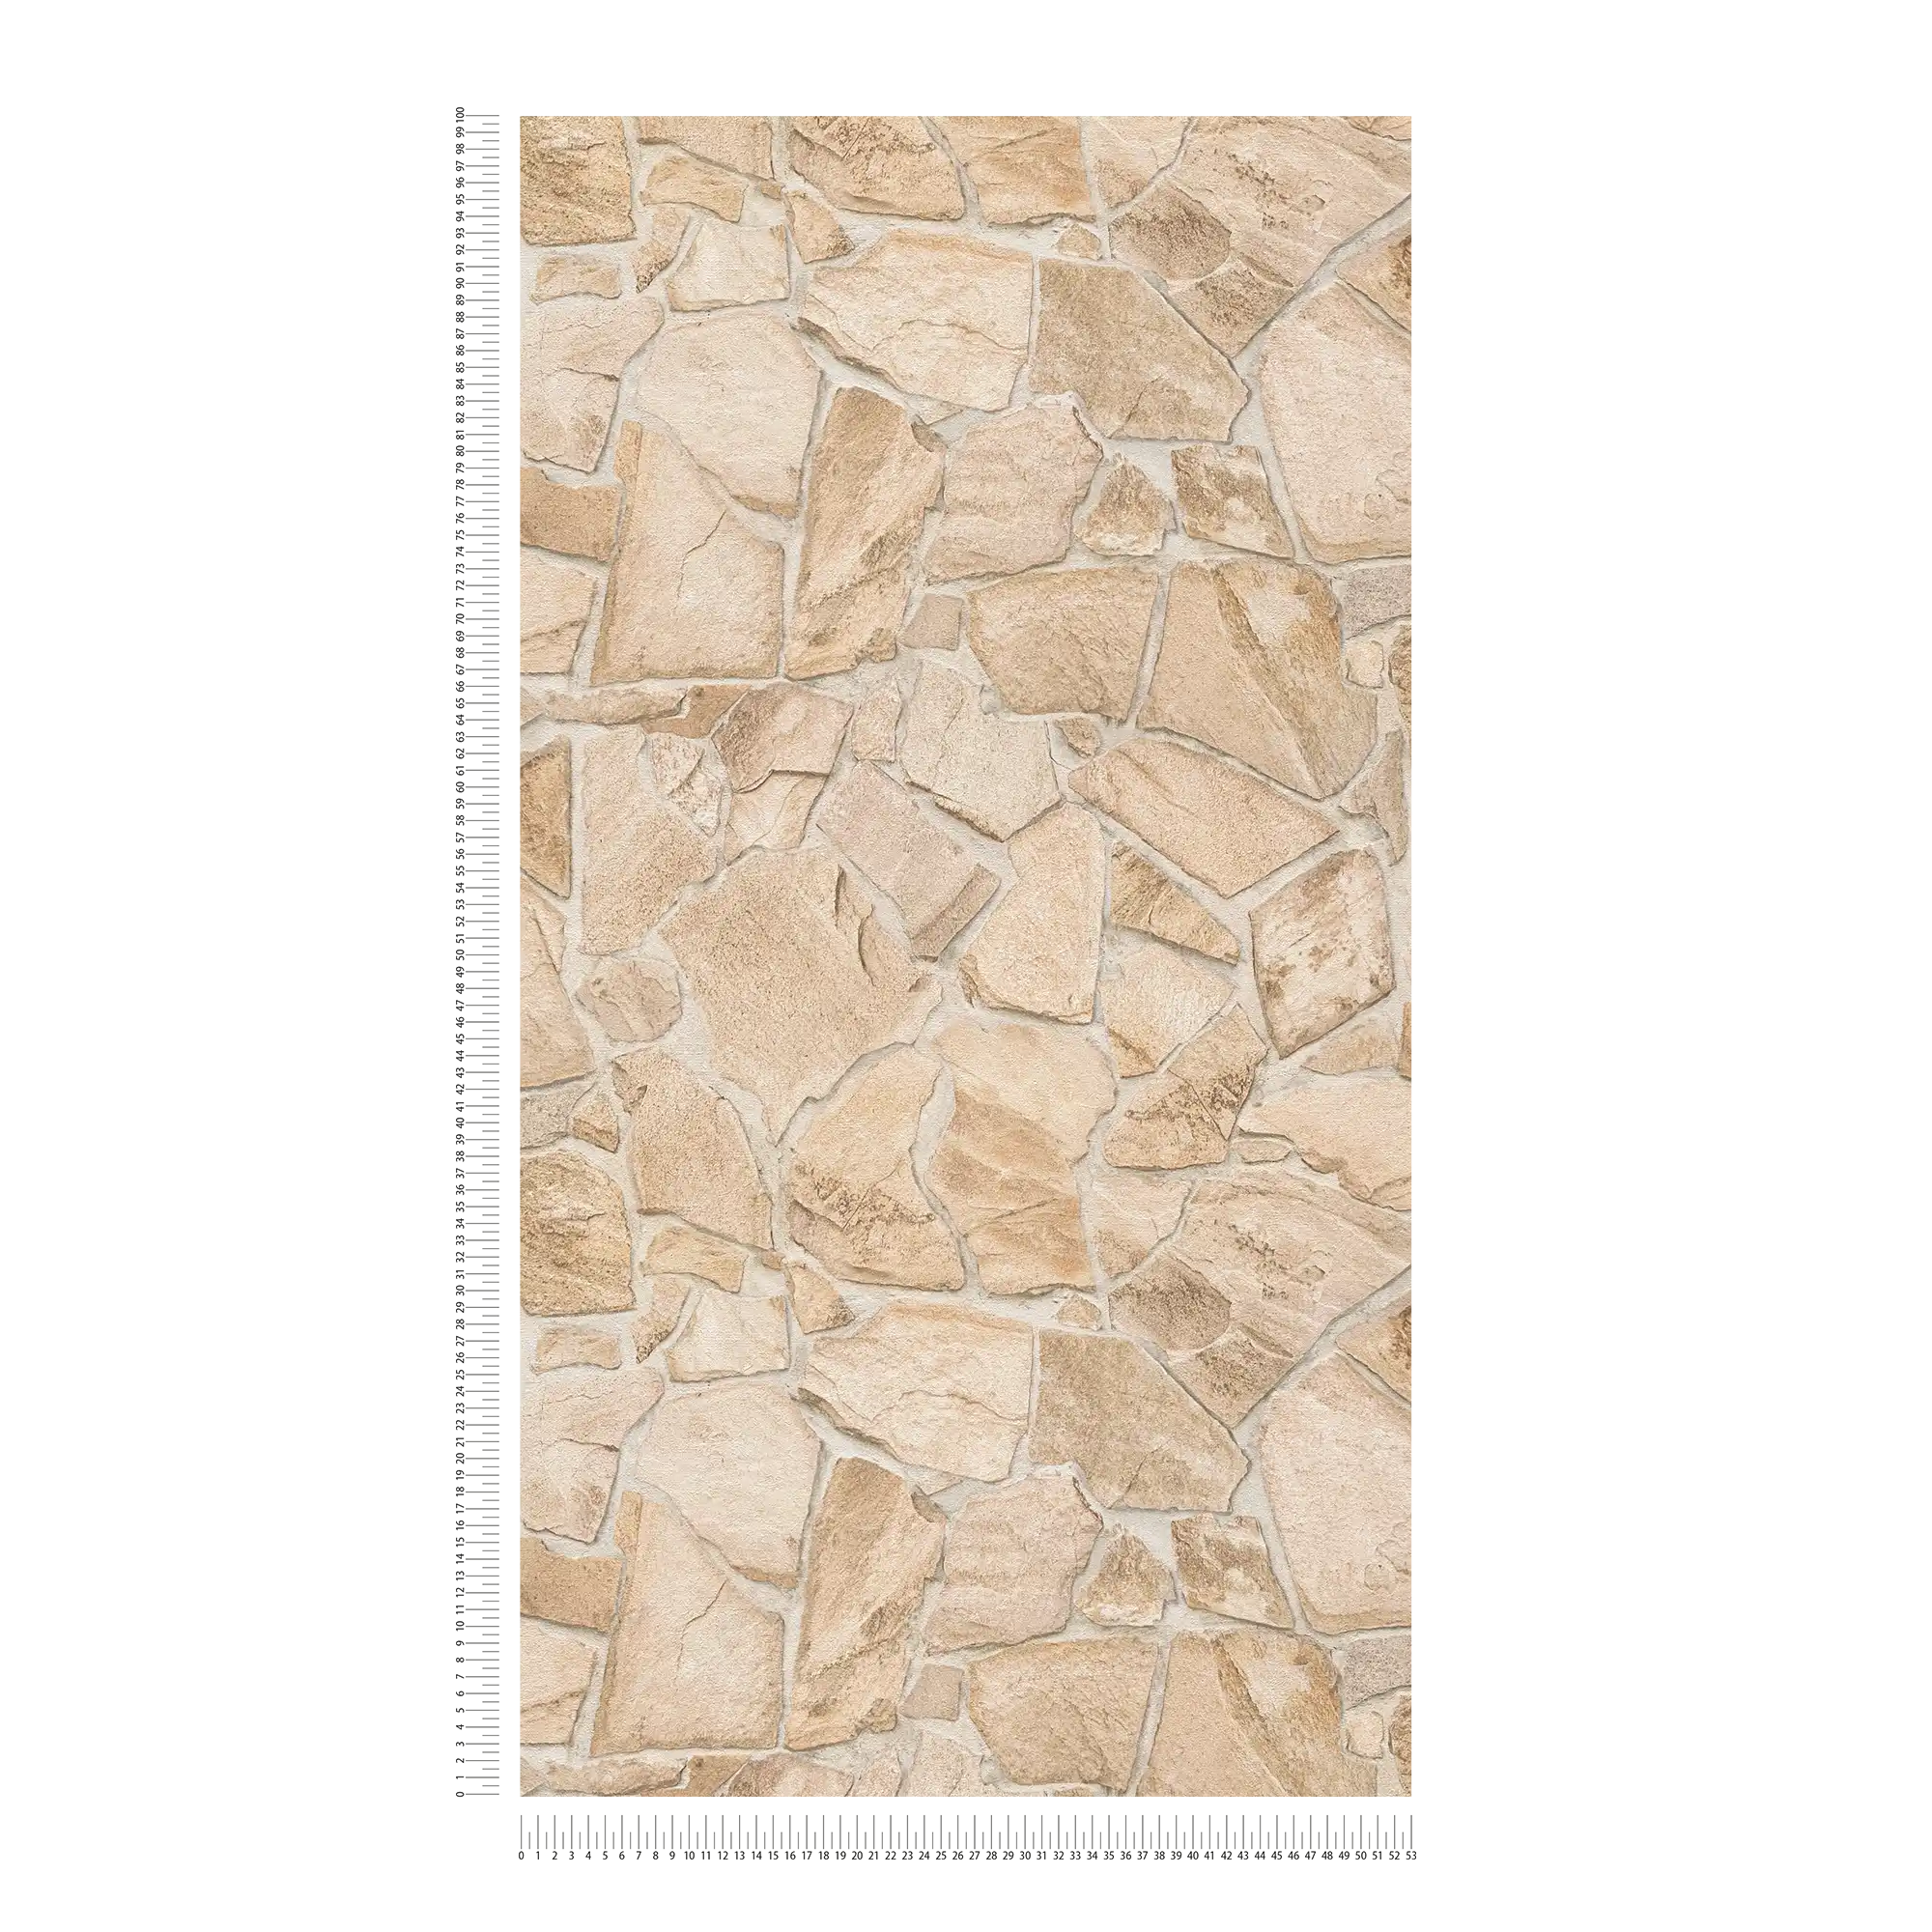             Stone Wall Wallpaper with 3D Optics - Beige, Brown
        